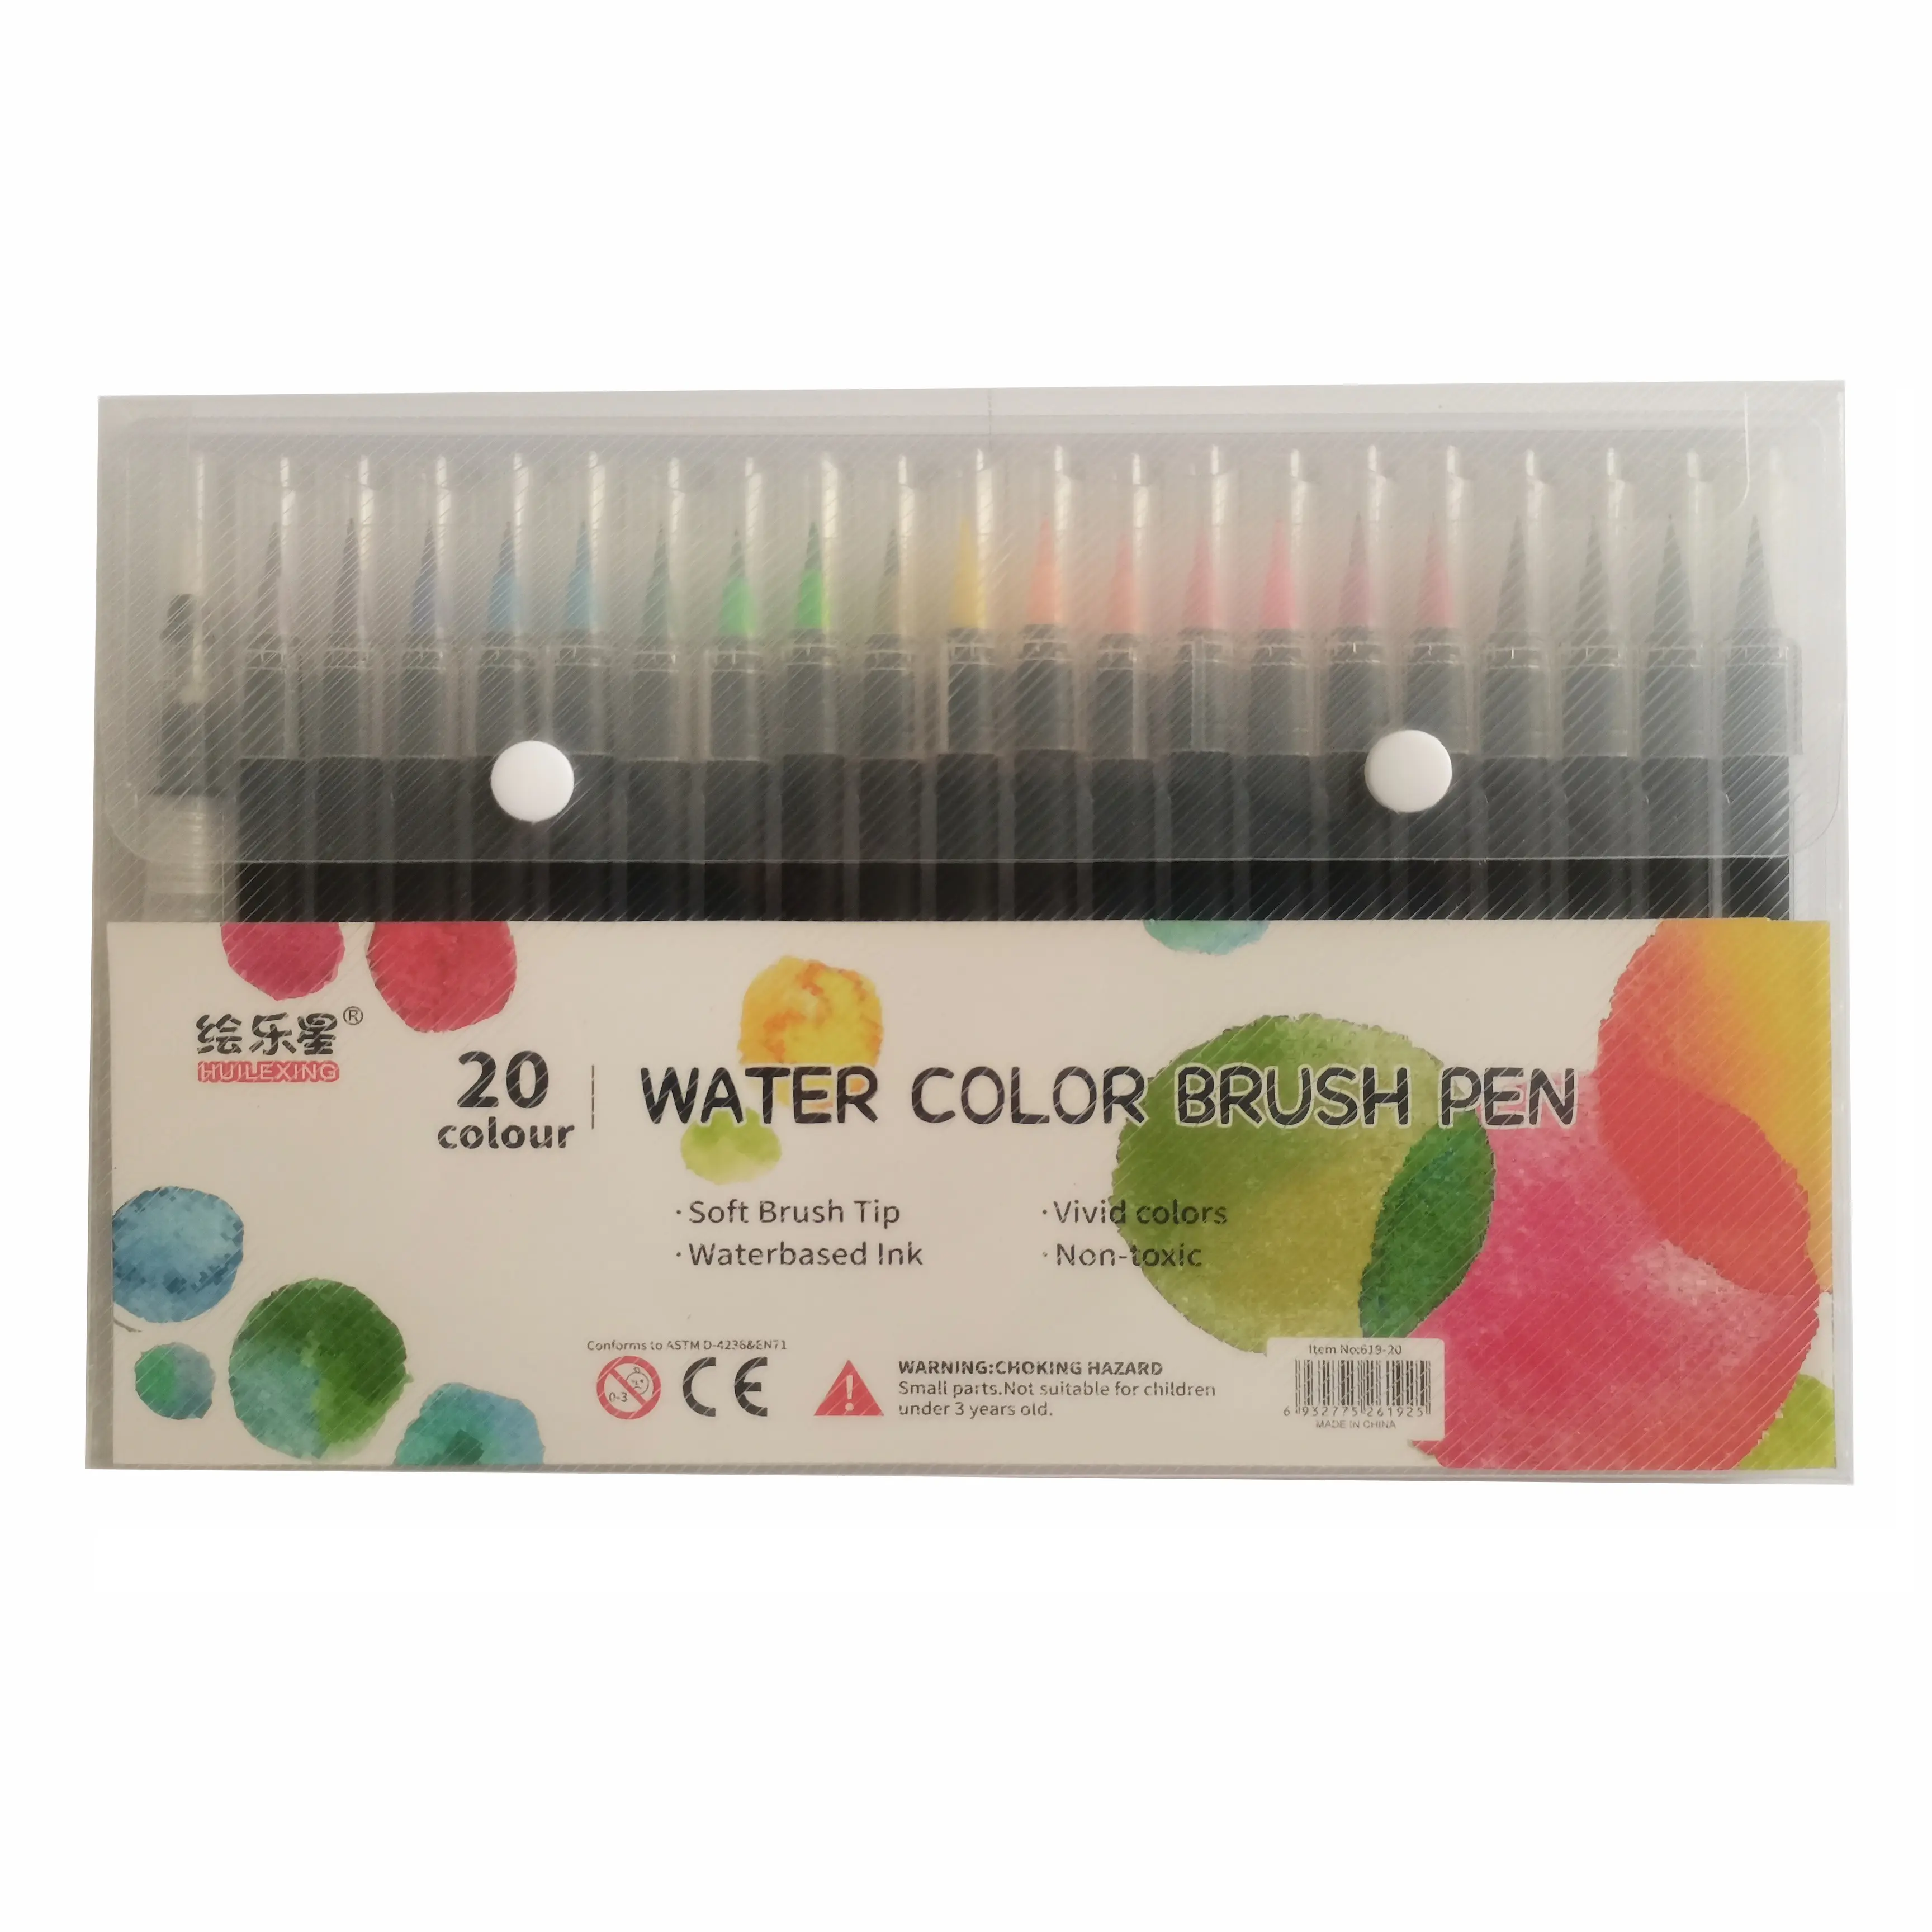 Good Quality 20 Colors Water Color Brush Art Marker Pen with one Watercolor Fountain Pen for Calligraphy and Art